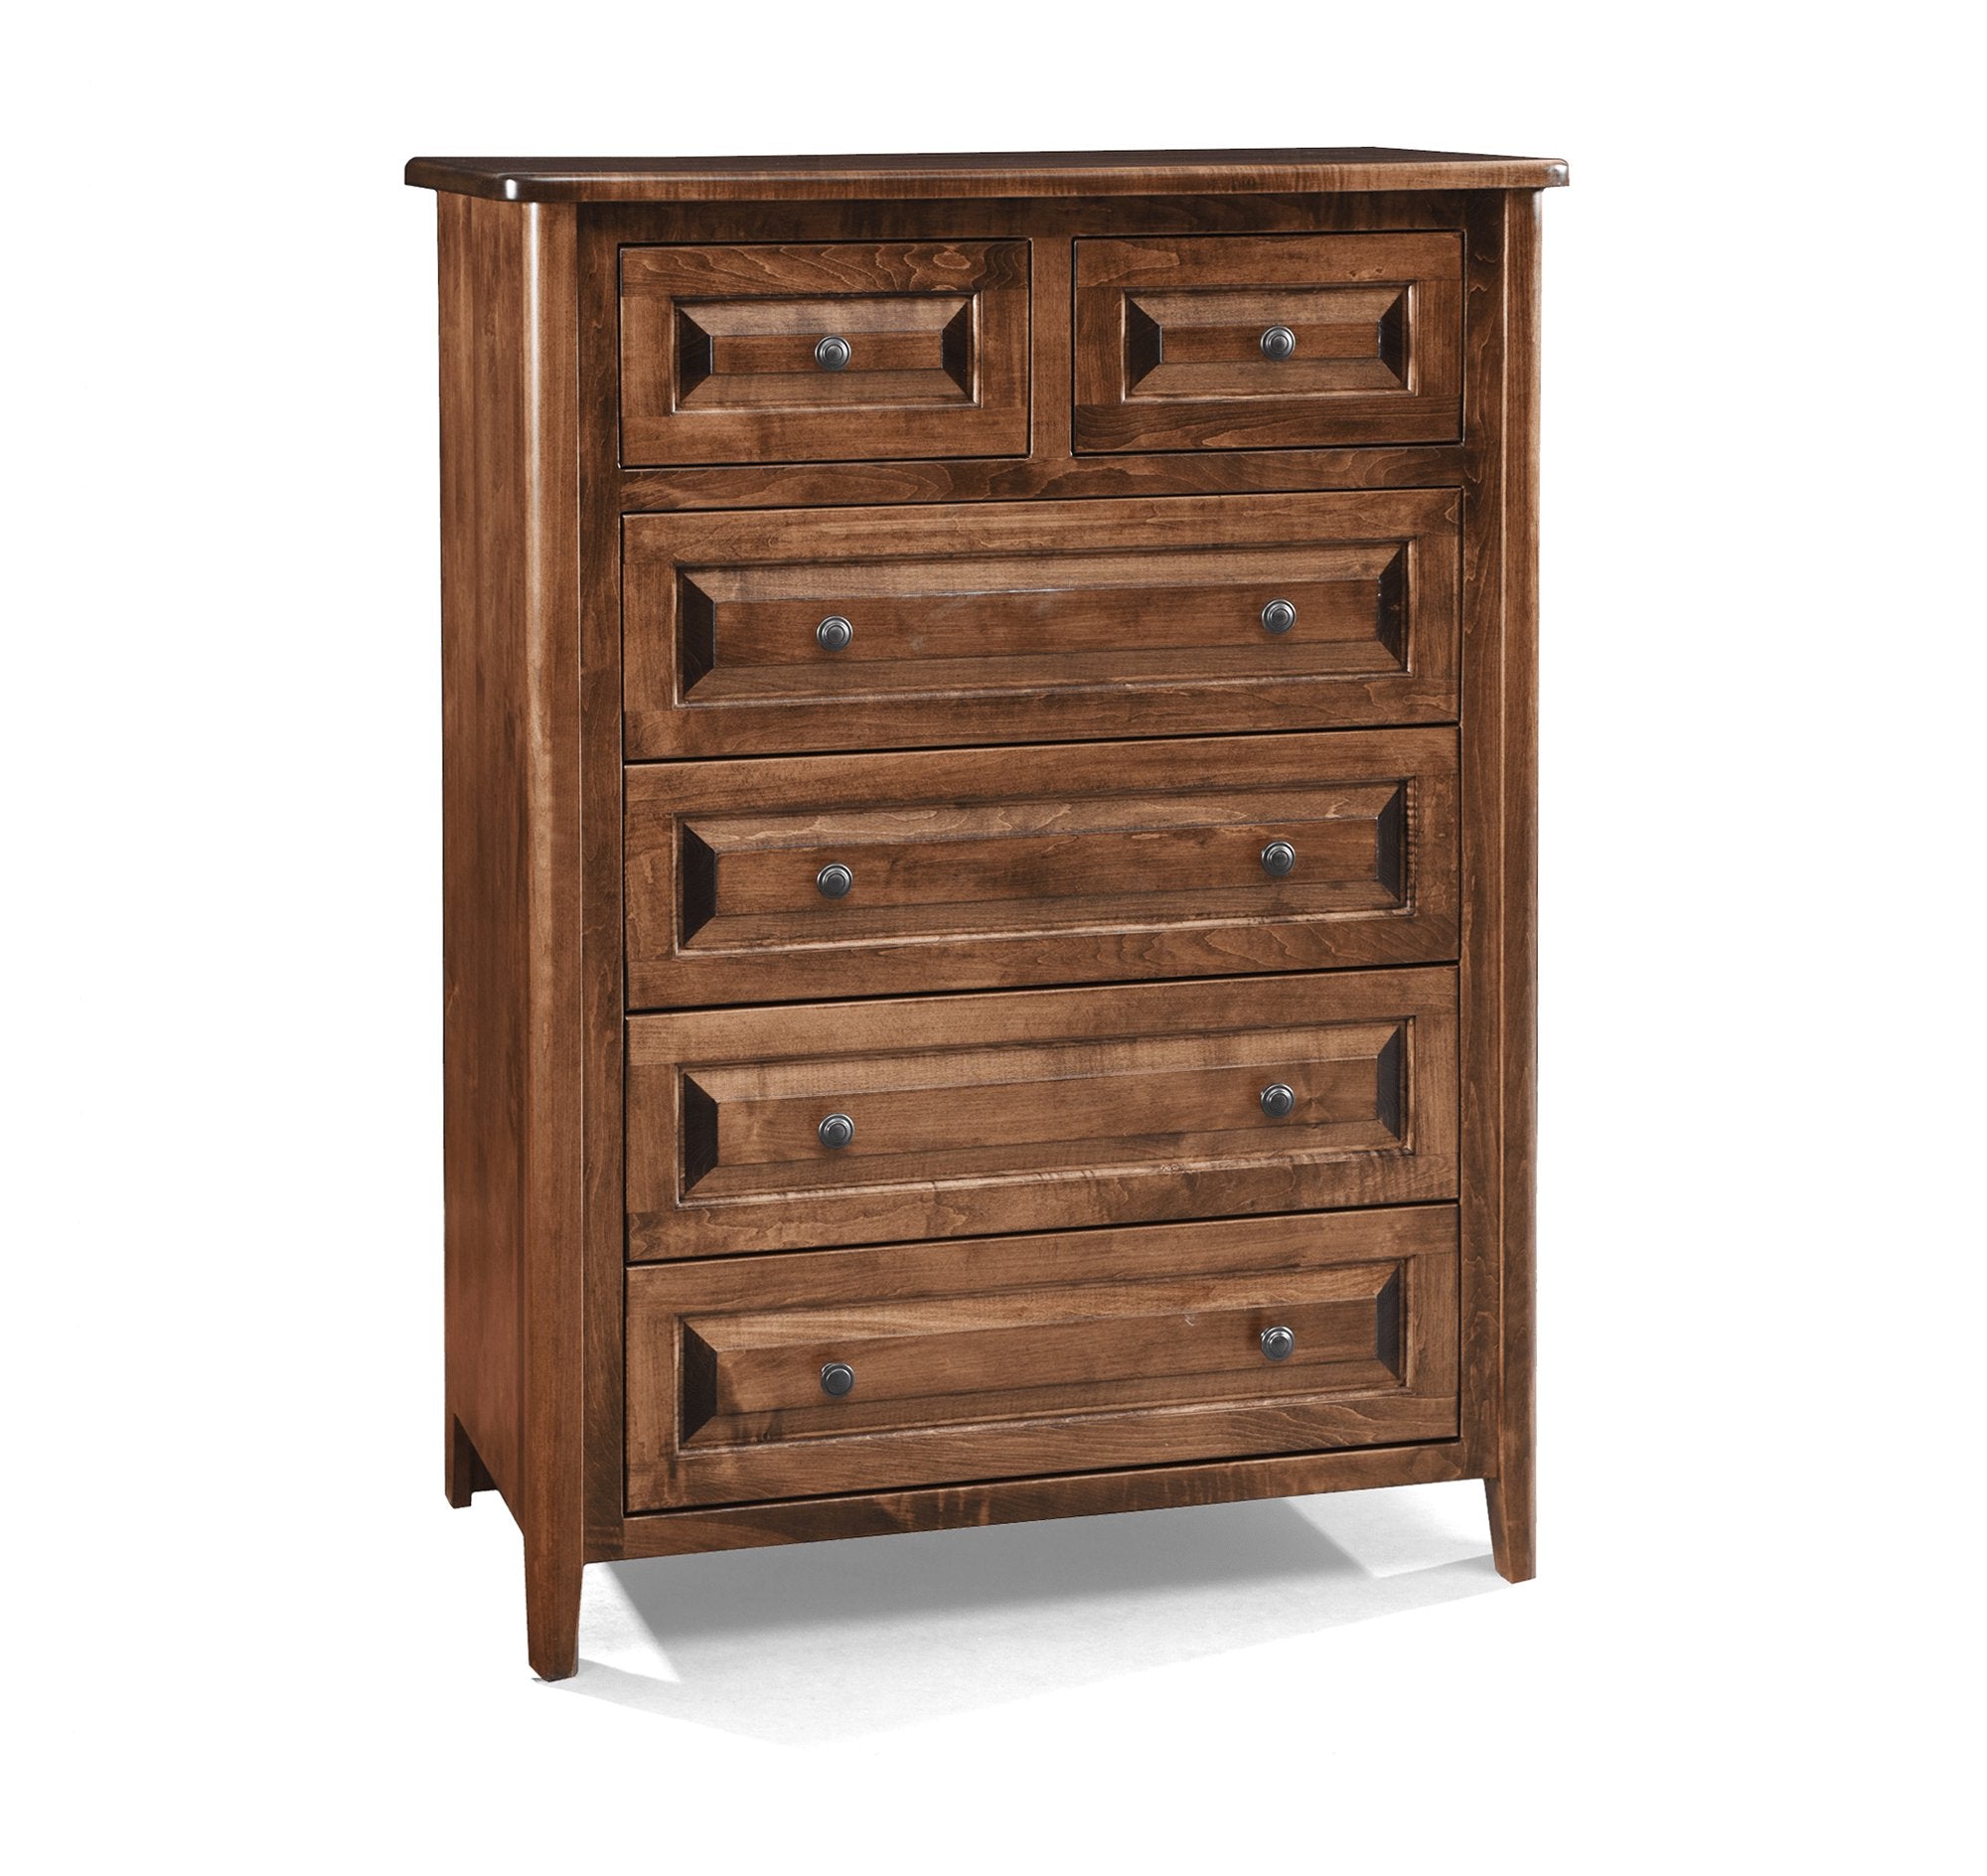 Carson 6 Drawer Chest - Baconco